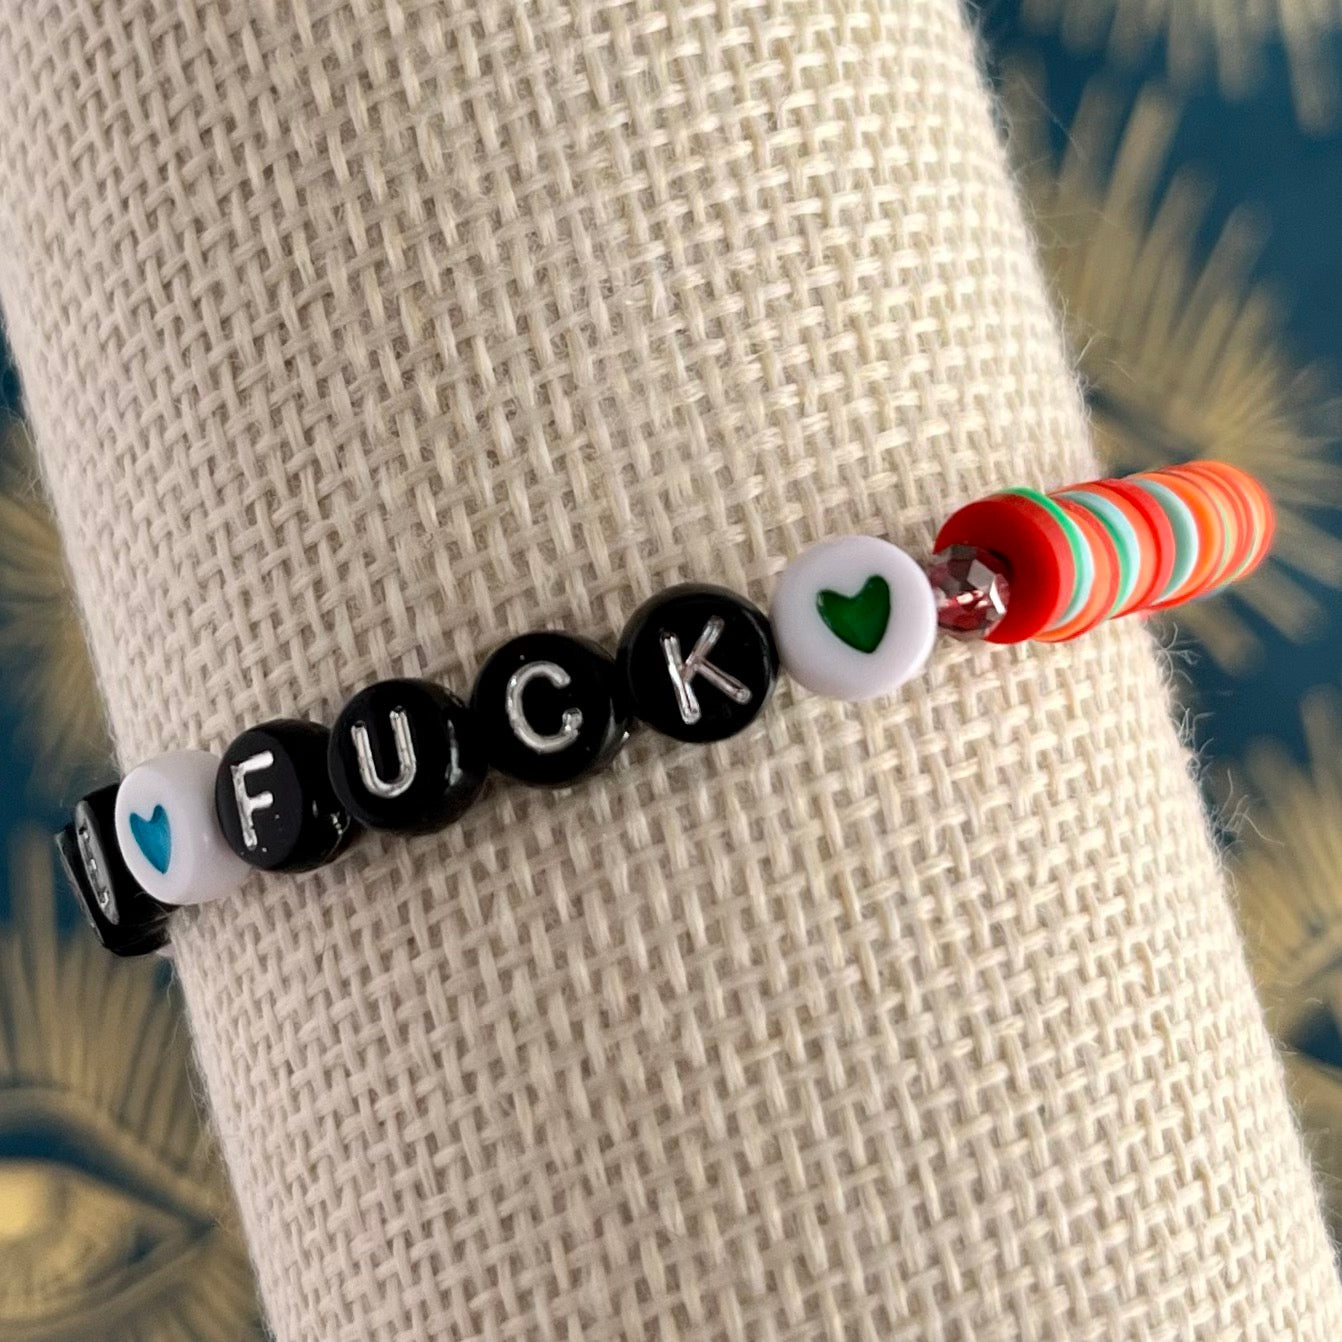 In Your Feelings Letter Bead Bracelets 'What the Fuck' Black Silver Letters,  rainbow multi and heart beads with blue aventurine stone bead